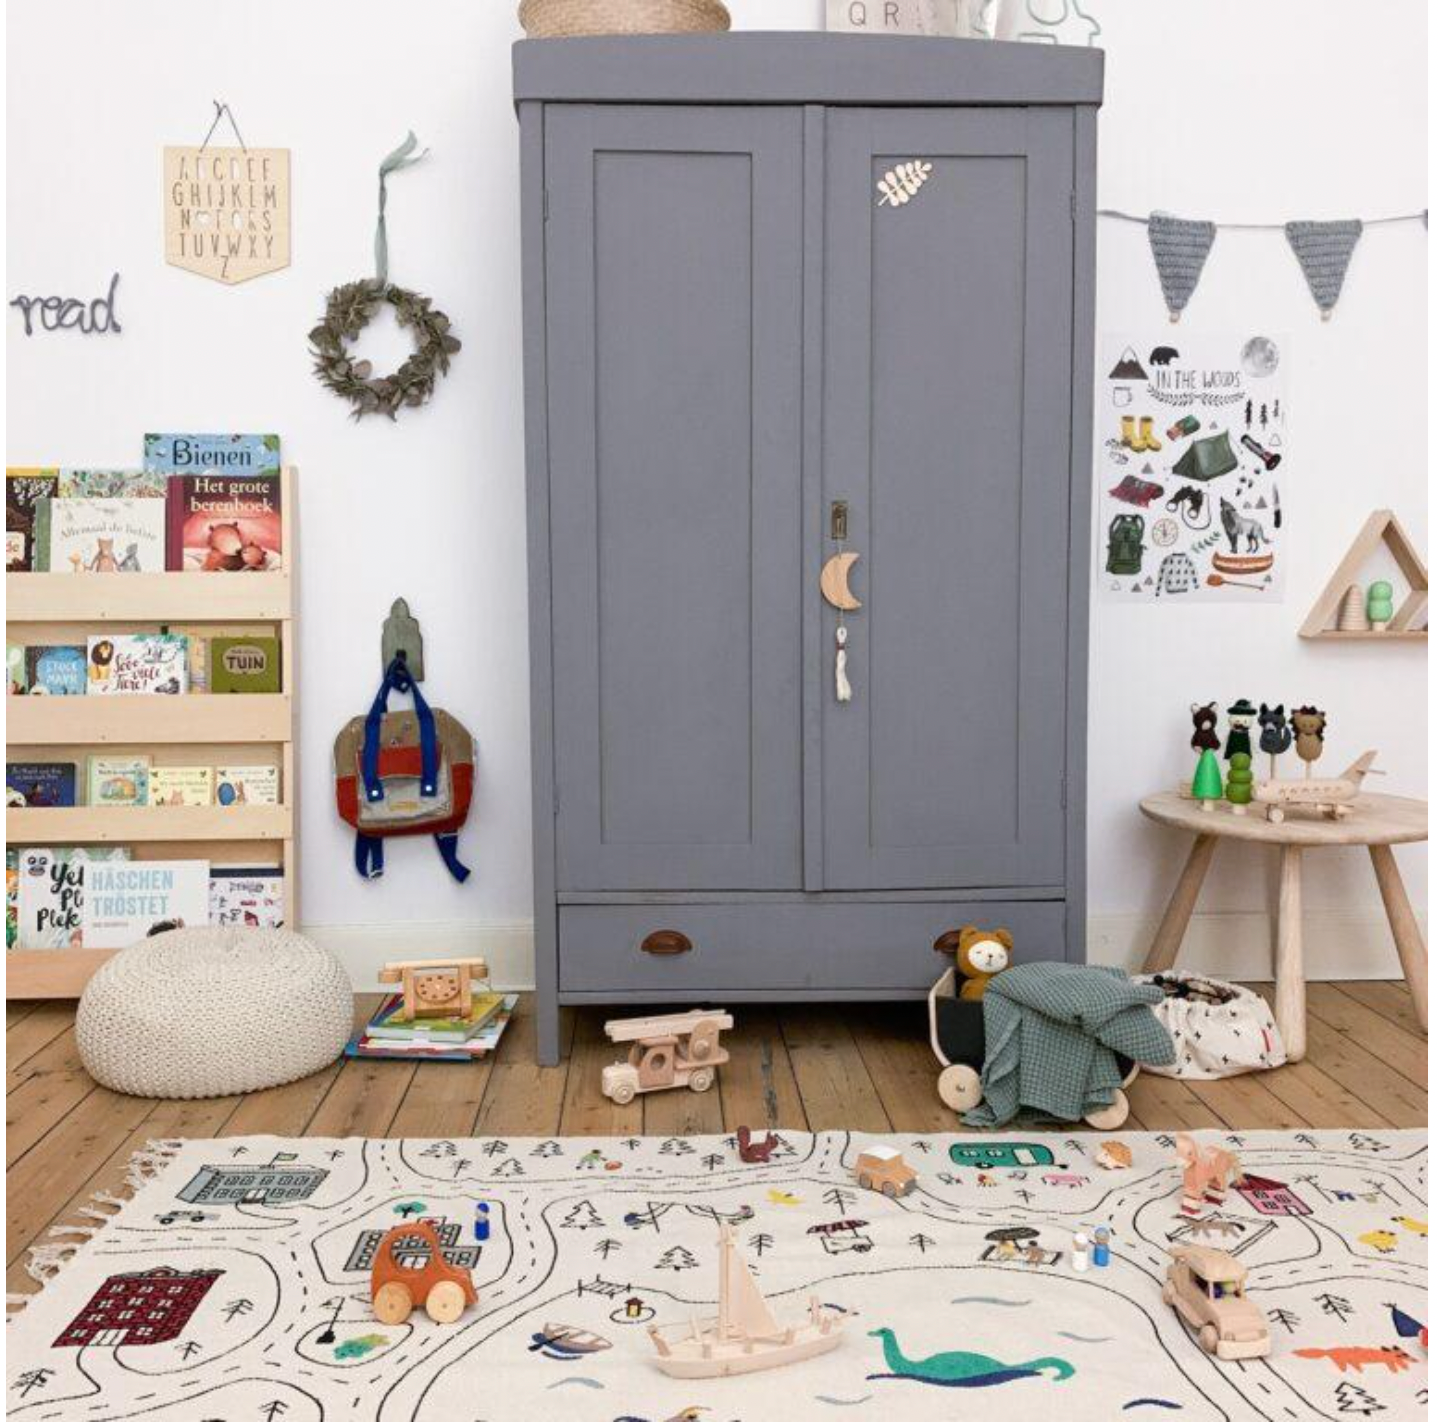 The Top 5 Designs for Kid-Friendly Rugs: From Animal Prints to Geometric Patterns